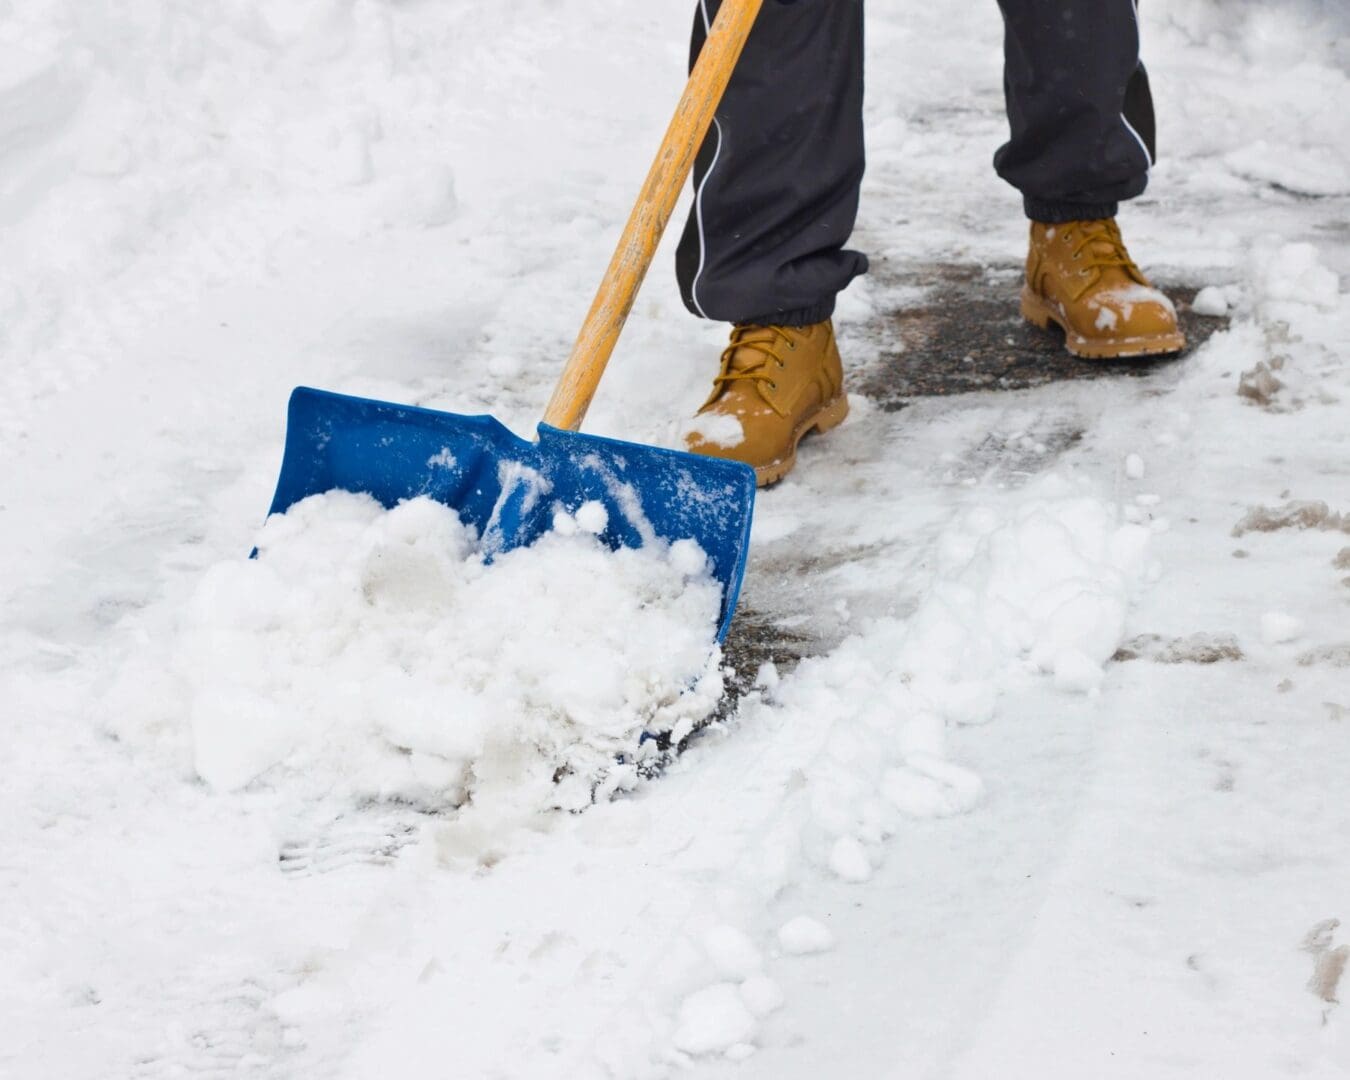 Clear your snow! It's the law. - RINewsToday.com